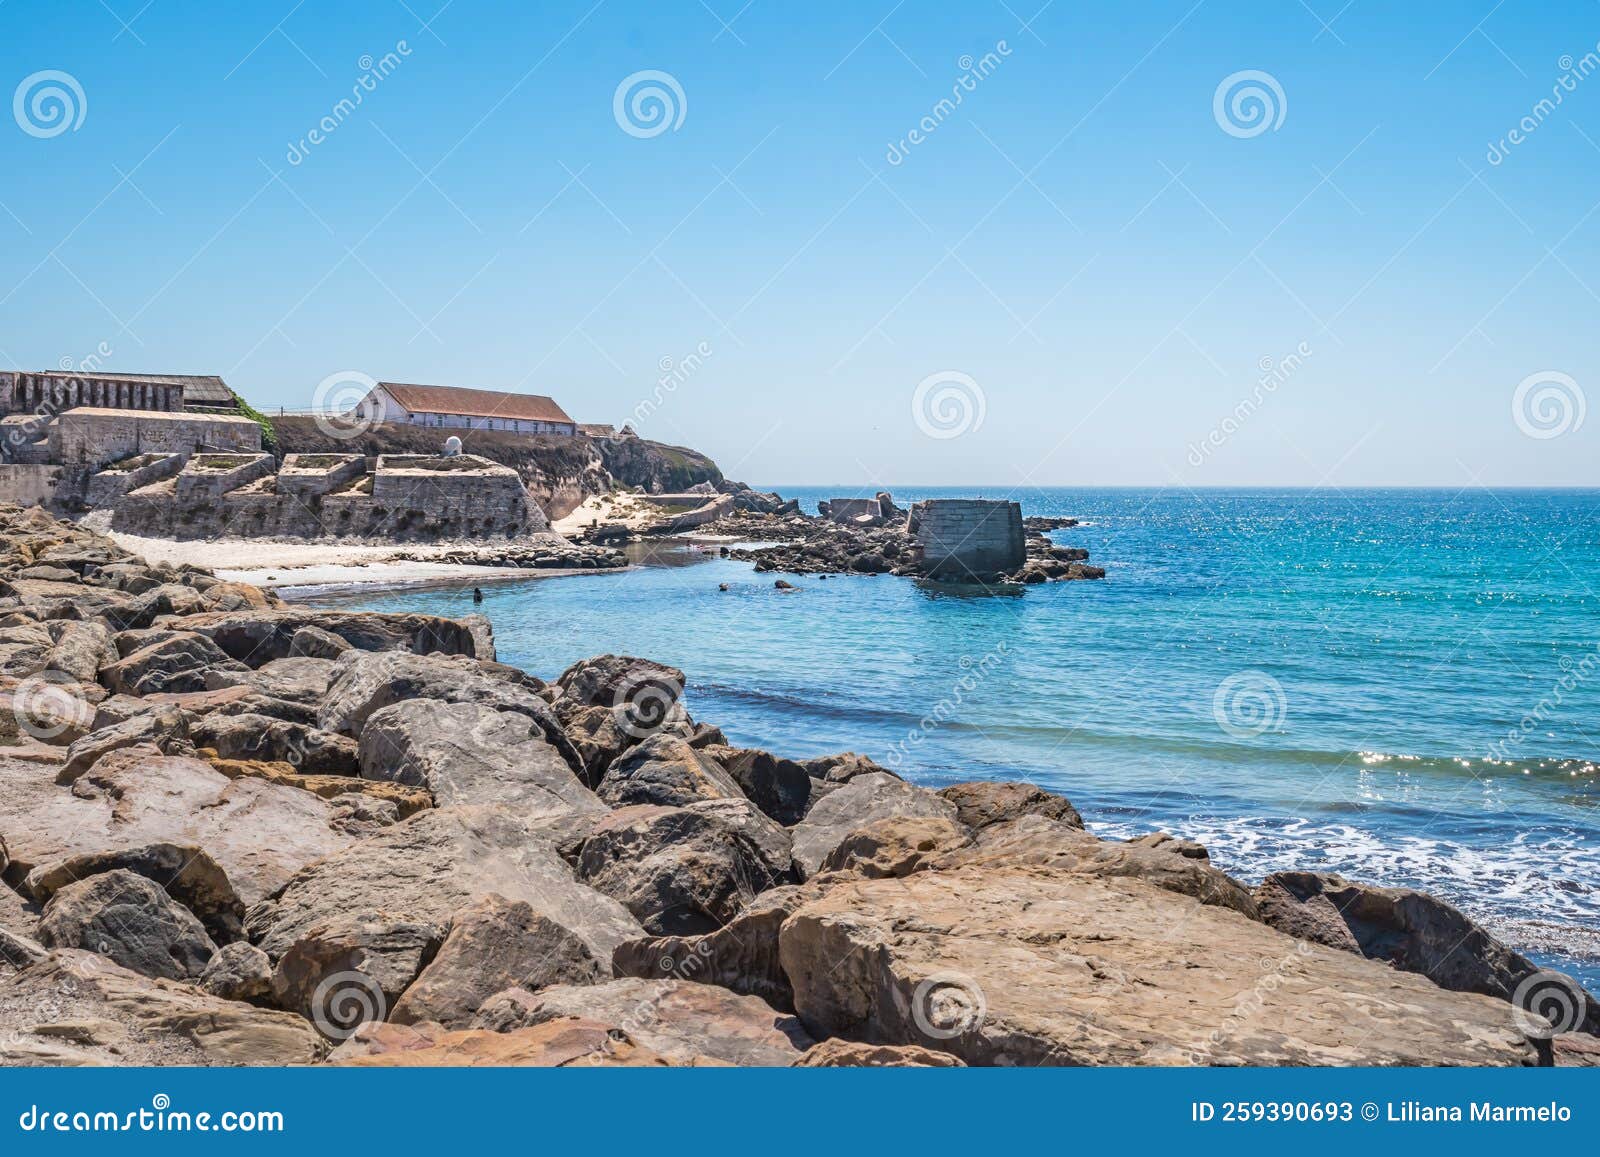 selective focus in rocks with turquoise atlantic ocean and walls of the fort of the island of las palomas next to el foso, tarifa